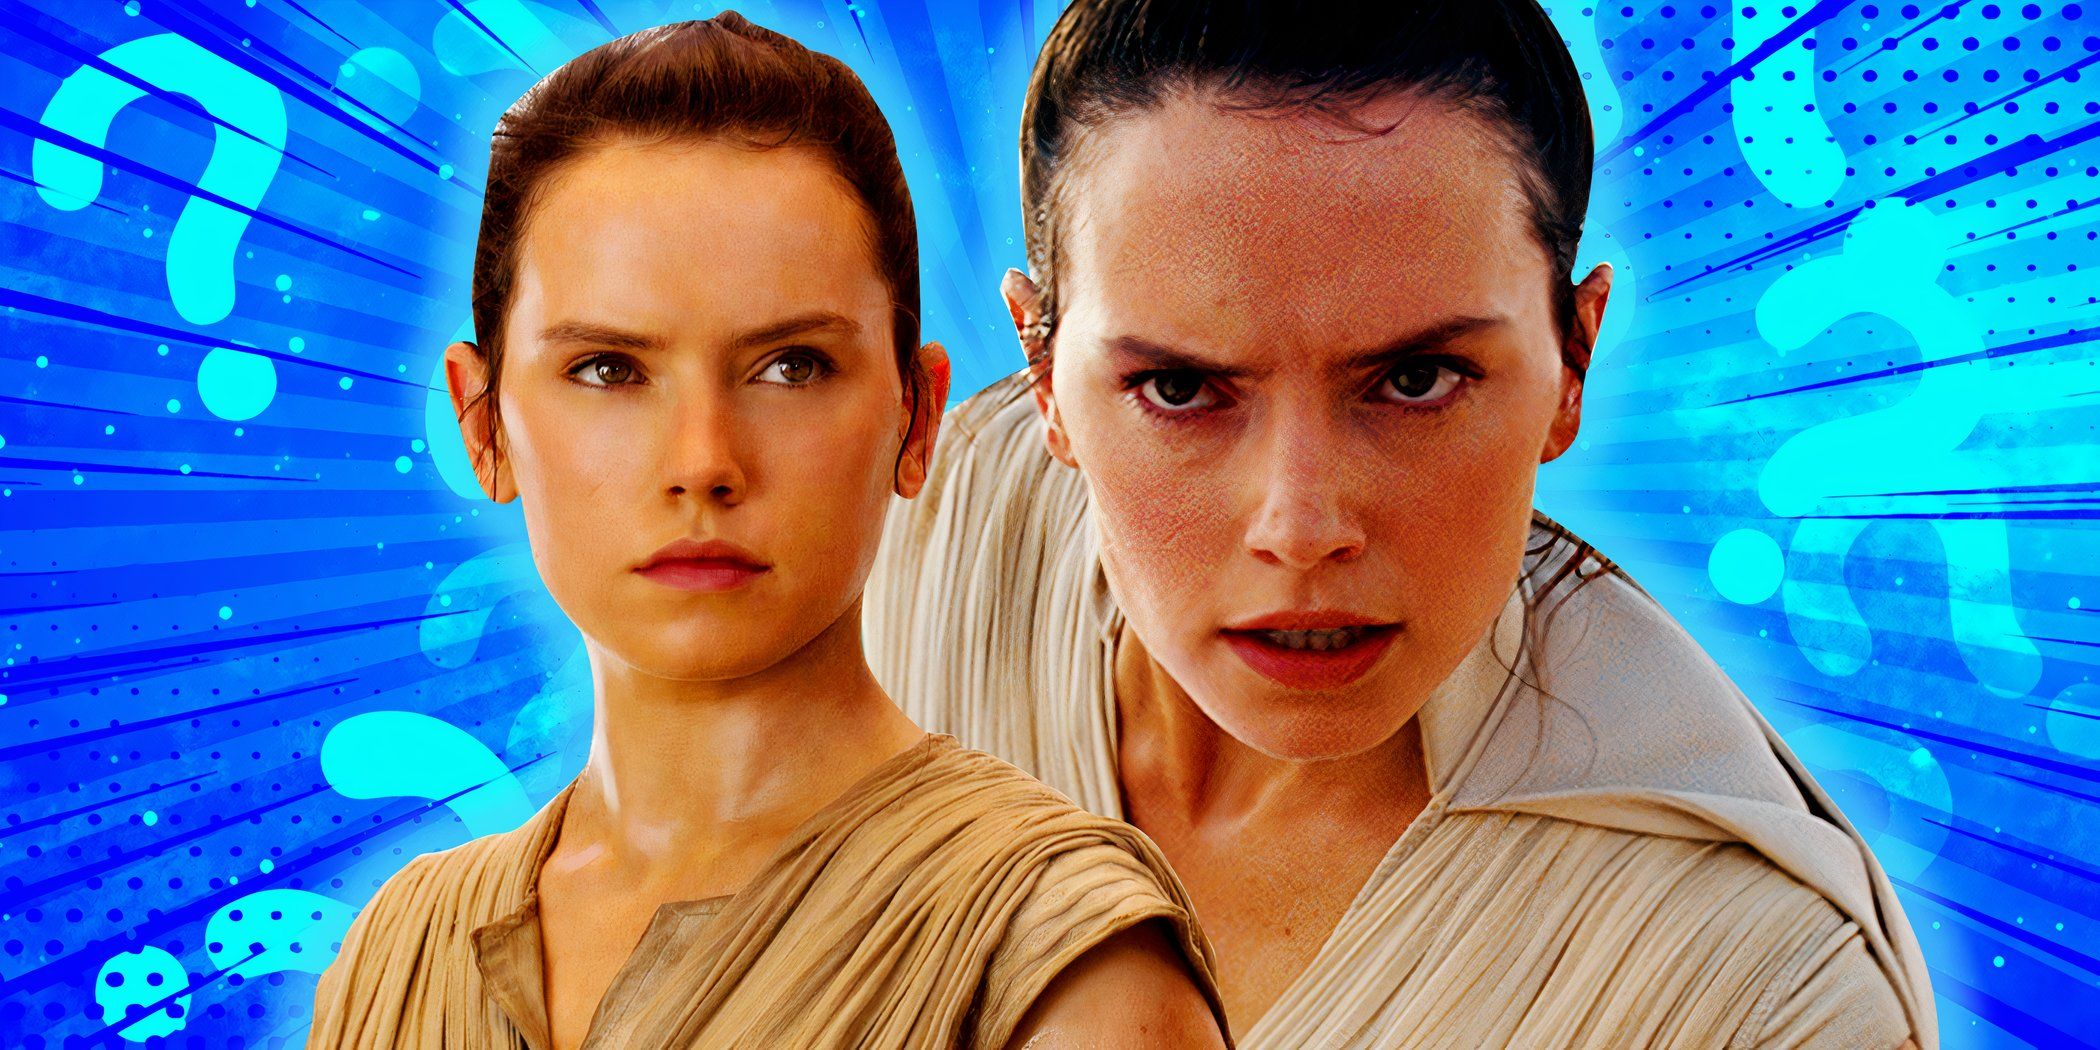 Rey Skywalker (Daisy Ridley) in Star Wars: The Force Awakens and Star Wars: The Rise of Skywalker in front of a blue background with question marks.